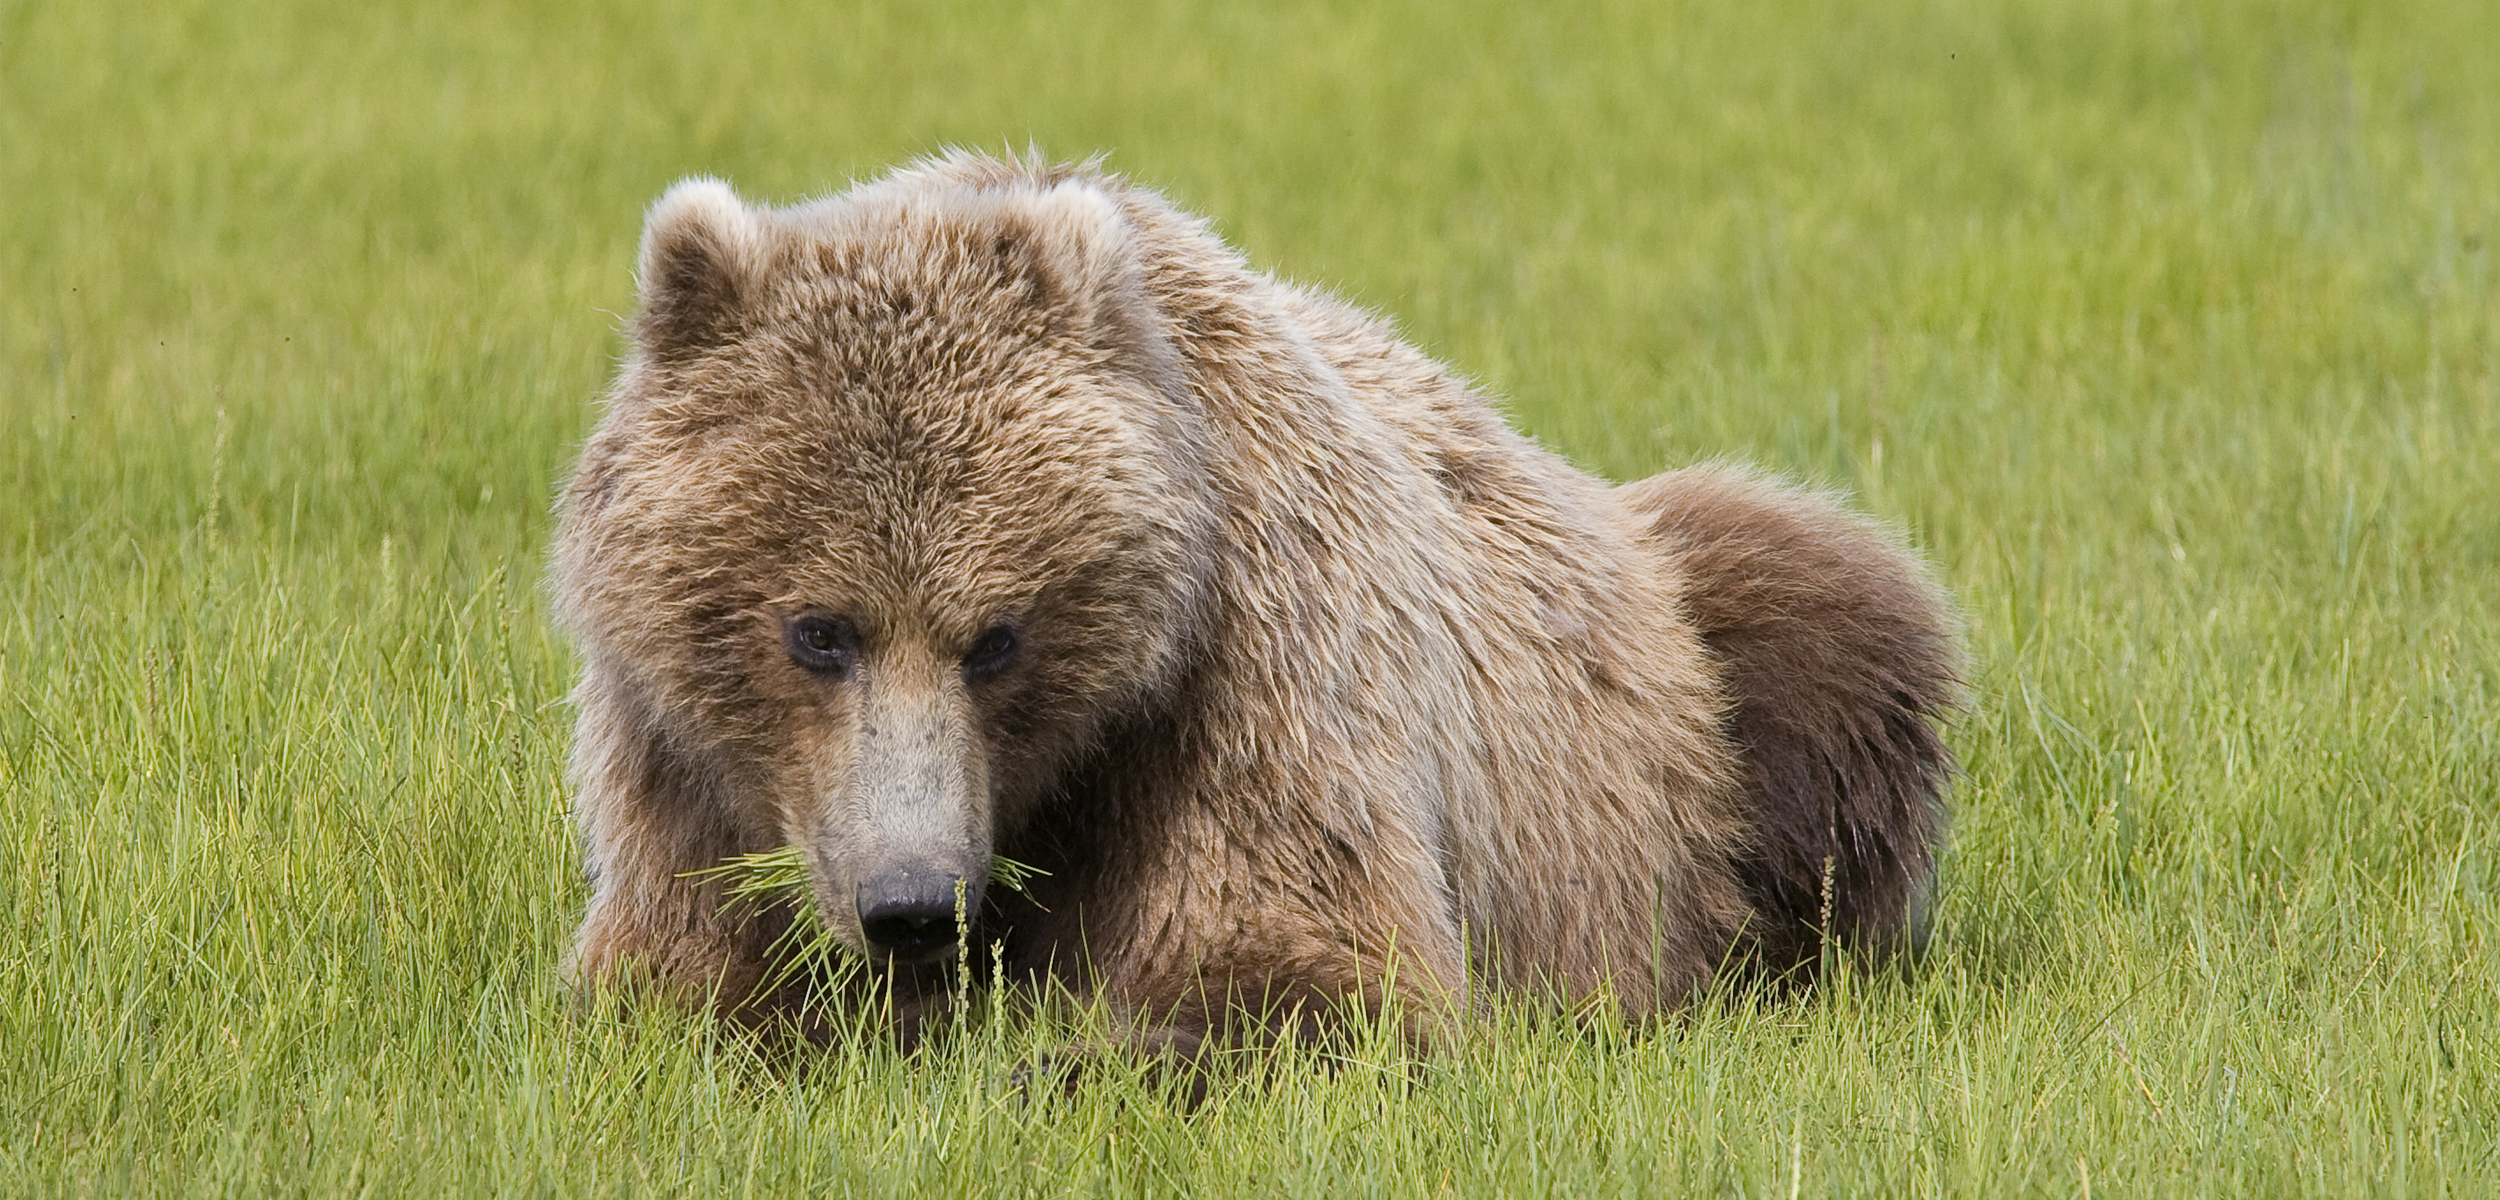 Bears in Alaska's Hallo Bay Are Changing What They Eat